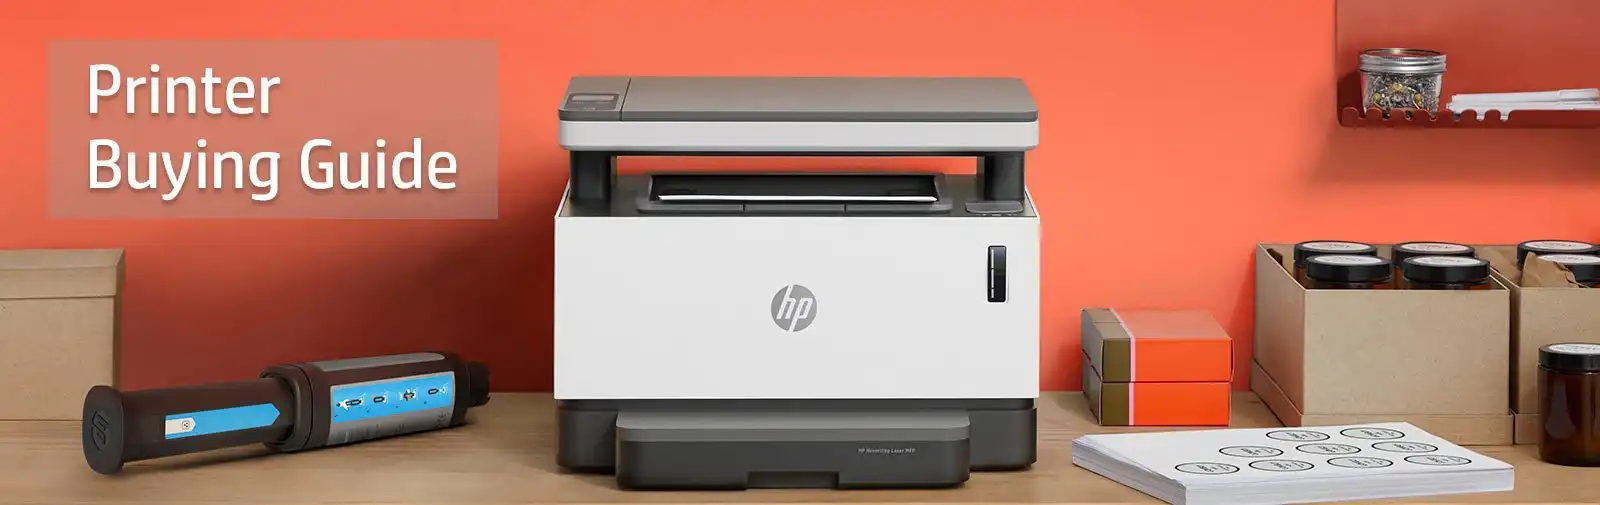 Printer buying guide 2022 - Top 5 printer for home use